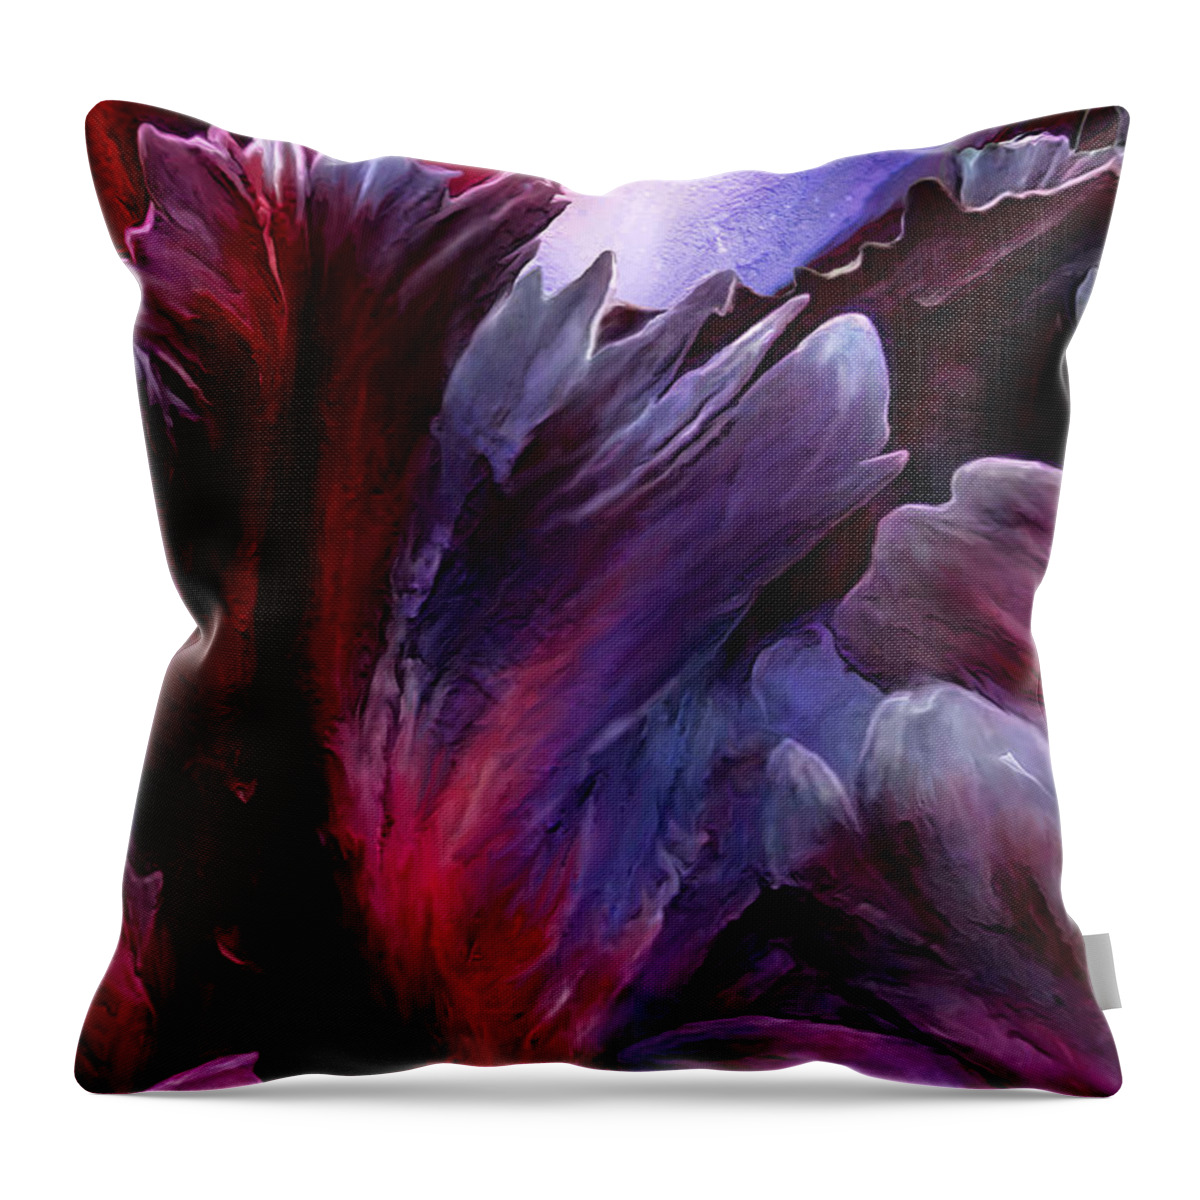 Tulips Throw Pillow featuring the mixed media Obsession by Carol Cavalaris